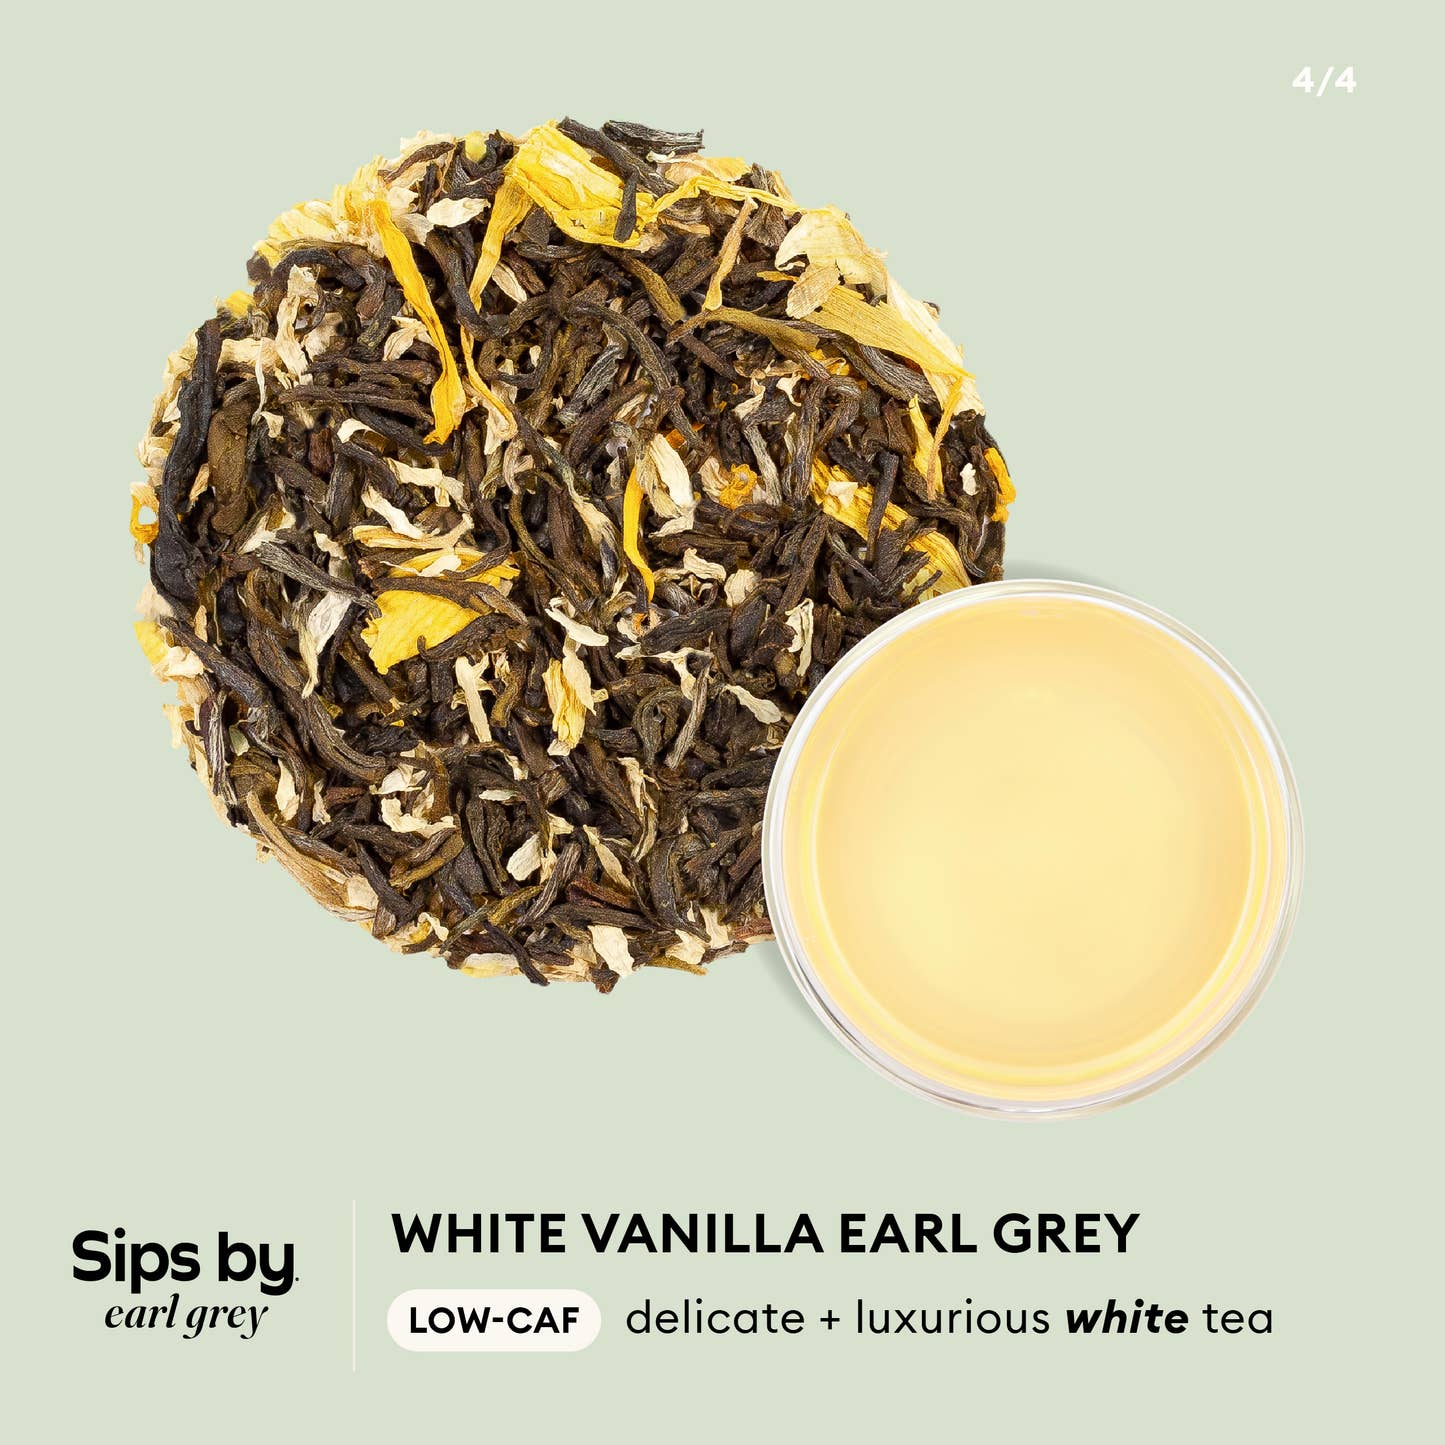 Sips by Earl Grey - White Vanilla Earl Grey low-caf, delicate + luxurious infographic